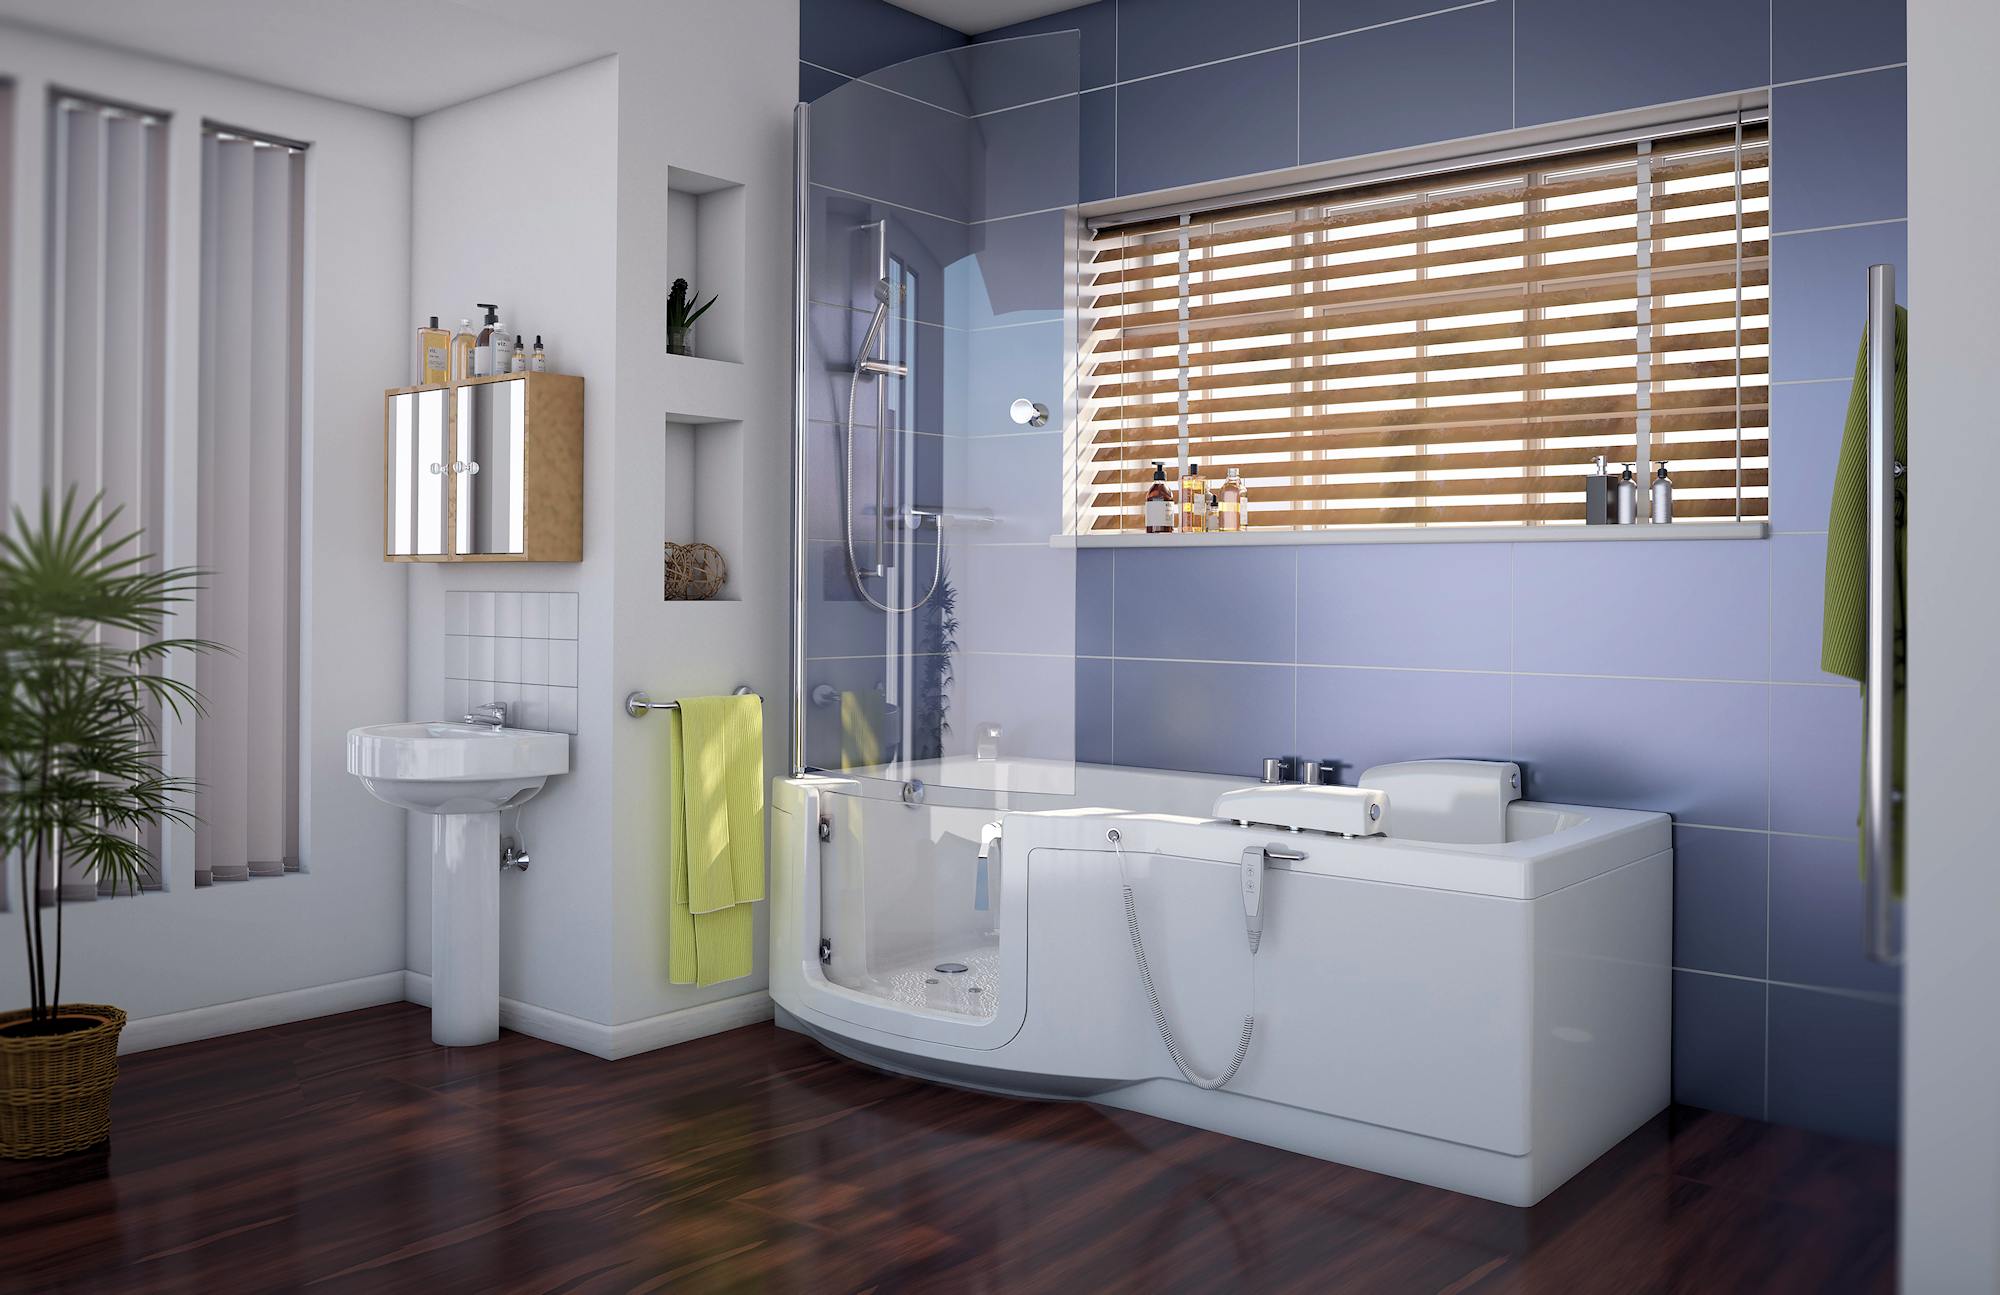 The Indiana p-shaped walk-in shower bath which can be optioned with hydrotherapy features as well as bluetooth audio and colour therapy features